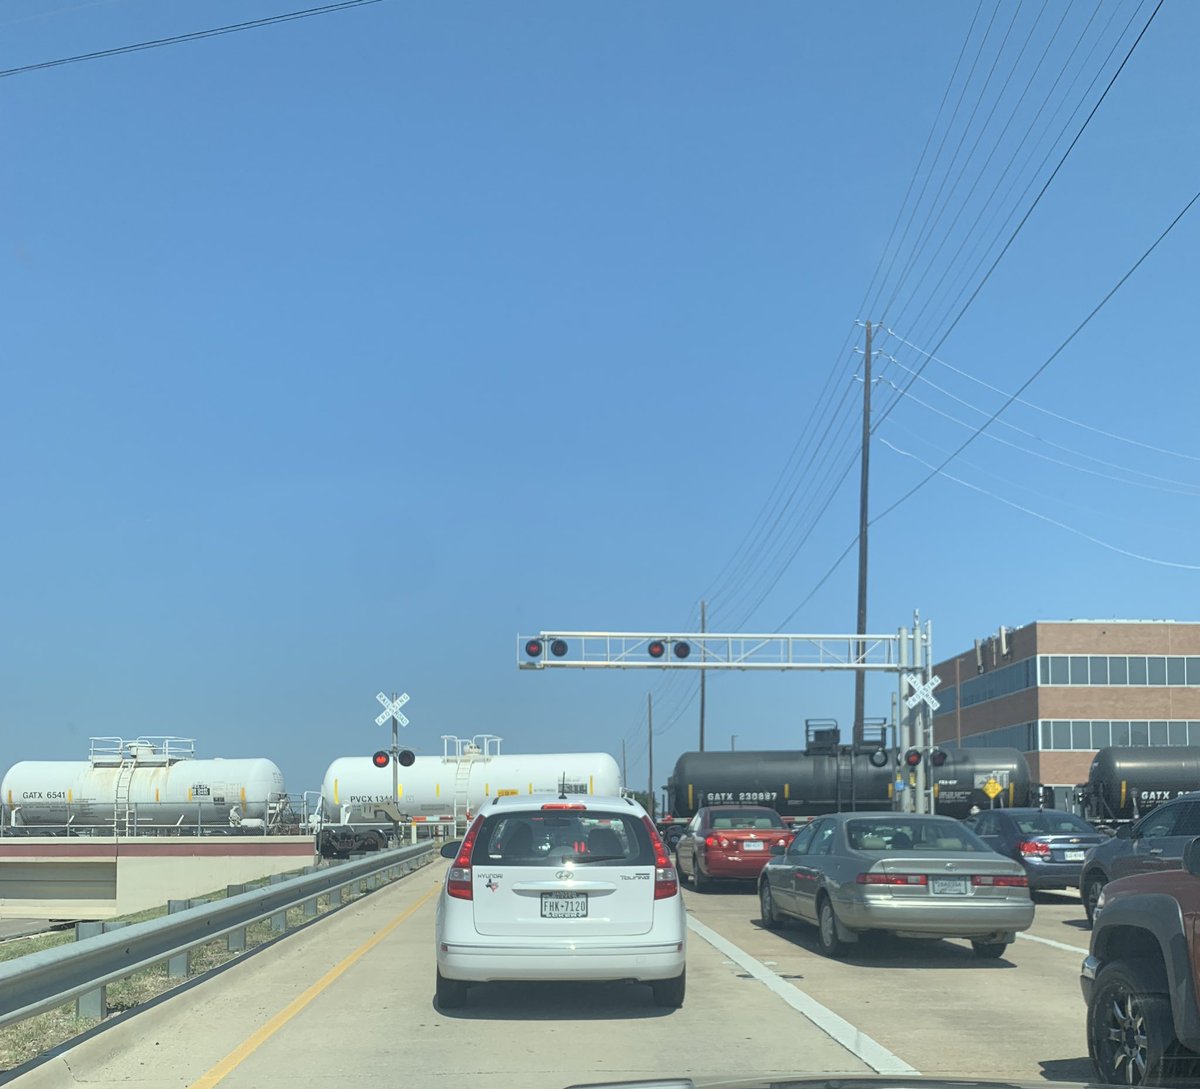 Hey @TxDOTDallas @TxDOT what’s up with the train totally stopped above PGBT in Carrollton/Far North Dallas?? 

Cars backed up on the E and W Trinity Mills roads for over a mile at this point. 

@CityOfDallas @CarrolltonTX